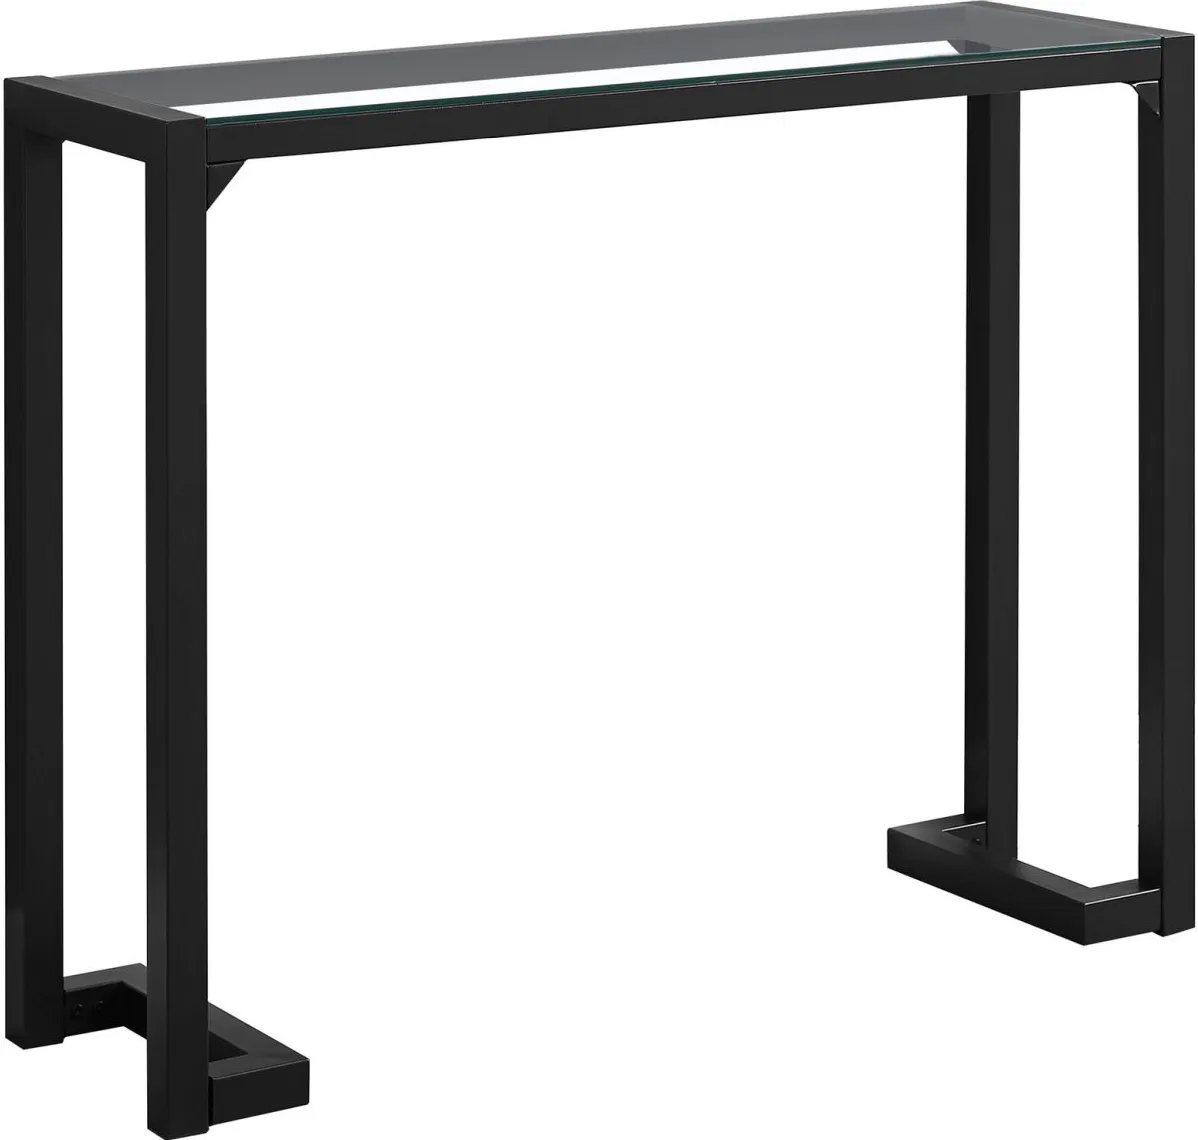 Accent Table, Console, Entryway, Narrow, Sofa, Living Room, Bedroom, Metal, Tempered Glass, Black, Clear, Contemporary, Modern